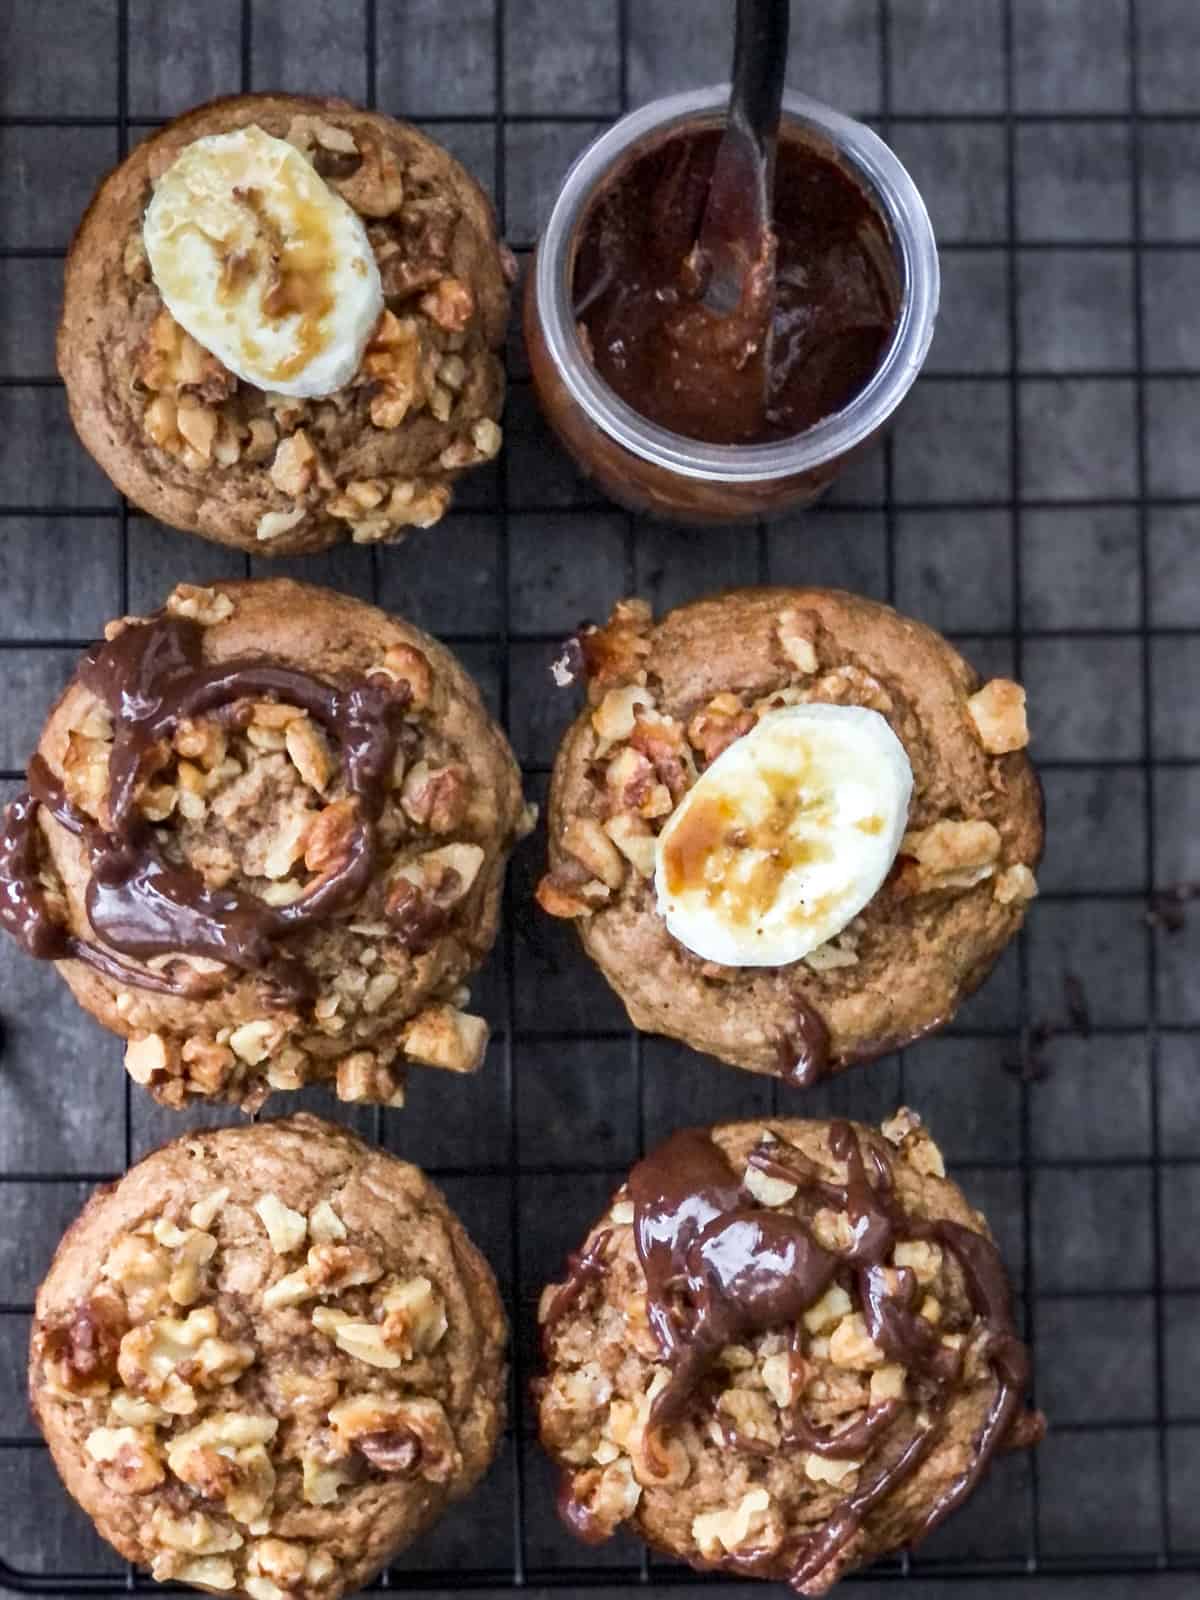 Banana nut muffins topped with banana slice and chocolate drizzled on a cooling rack.